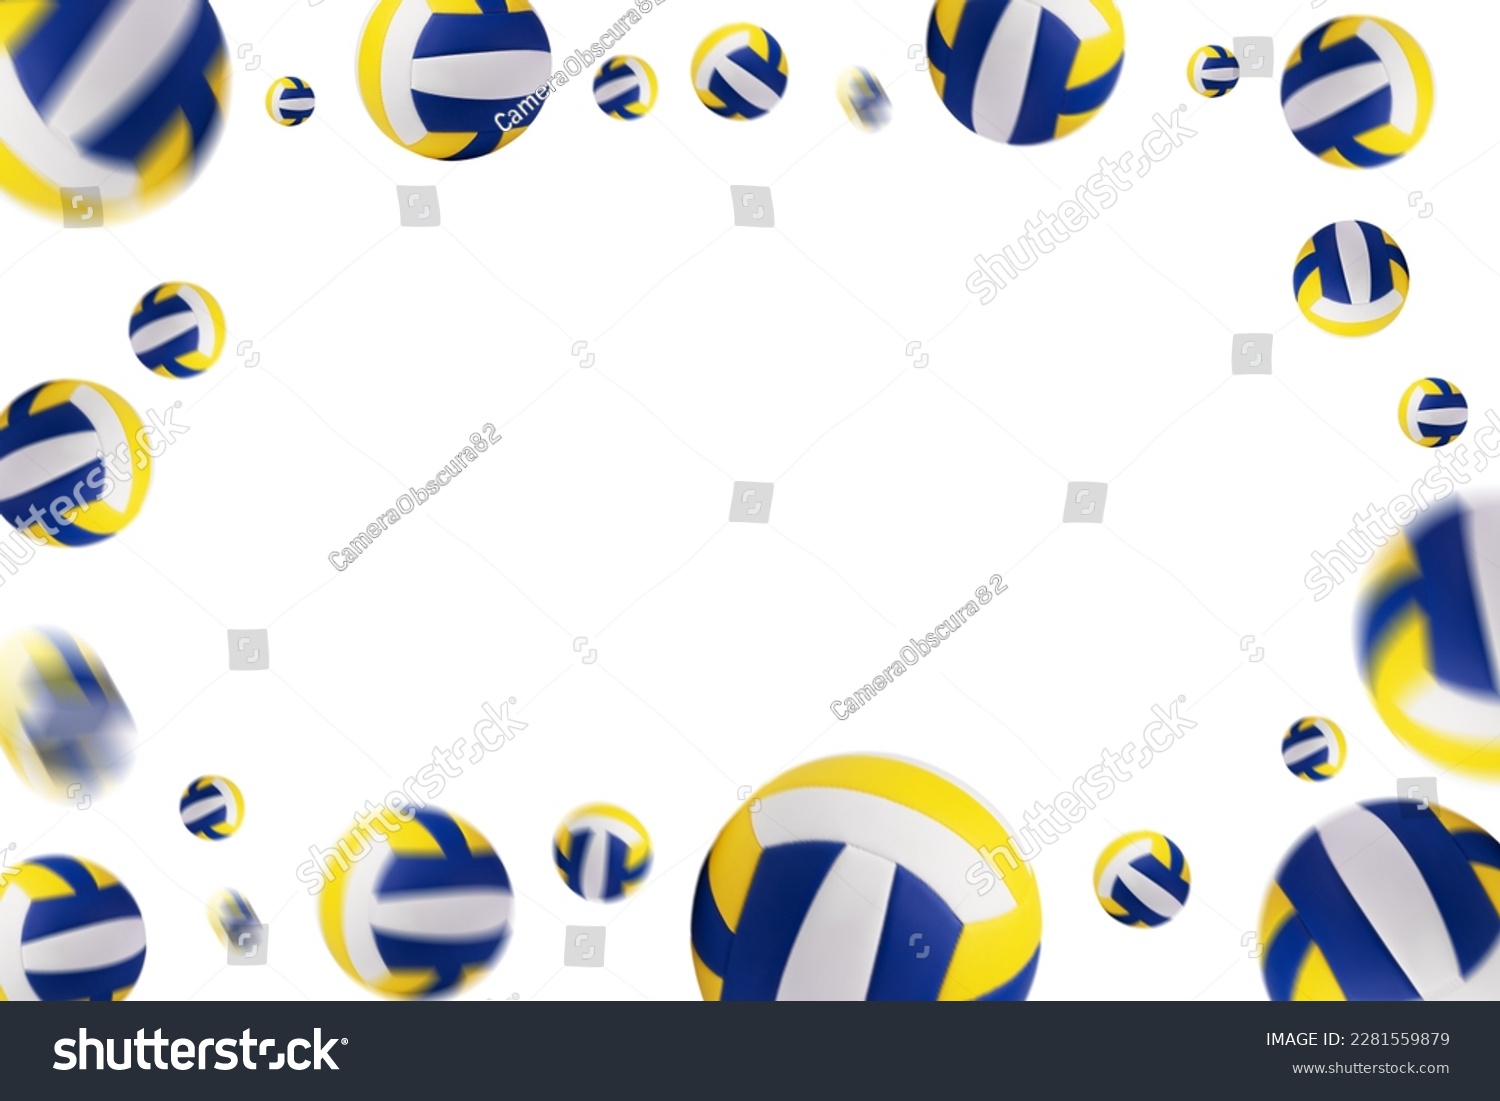 Volleyball ball in the air camera depth of field effect, Blur effect, isolated background, middle area blank for text #2281559879